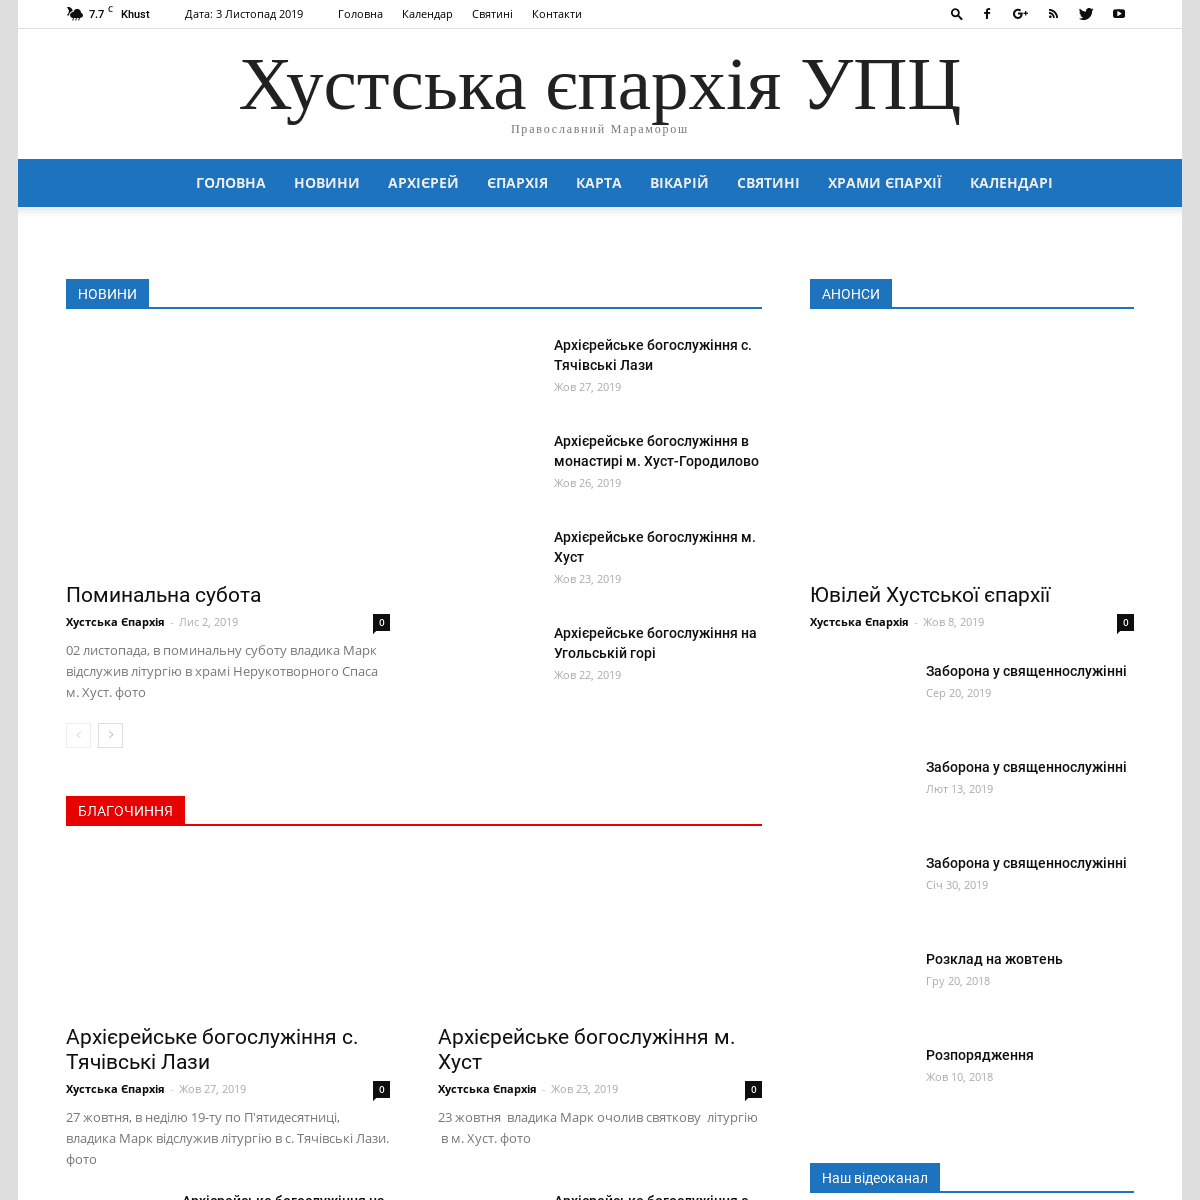 A complete backup of orthodoxkhust.org.ua